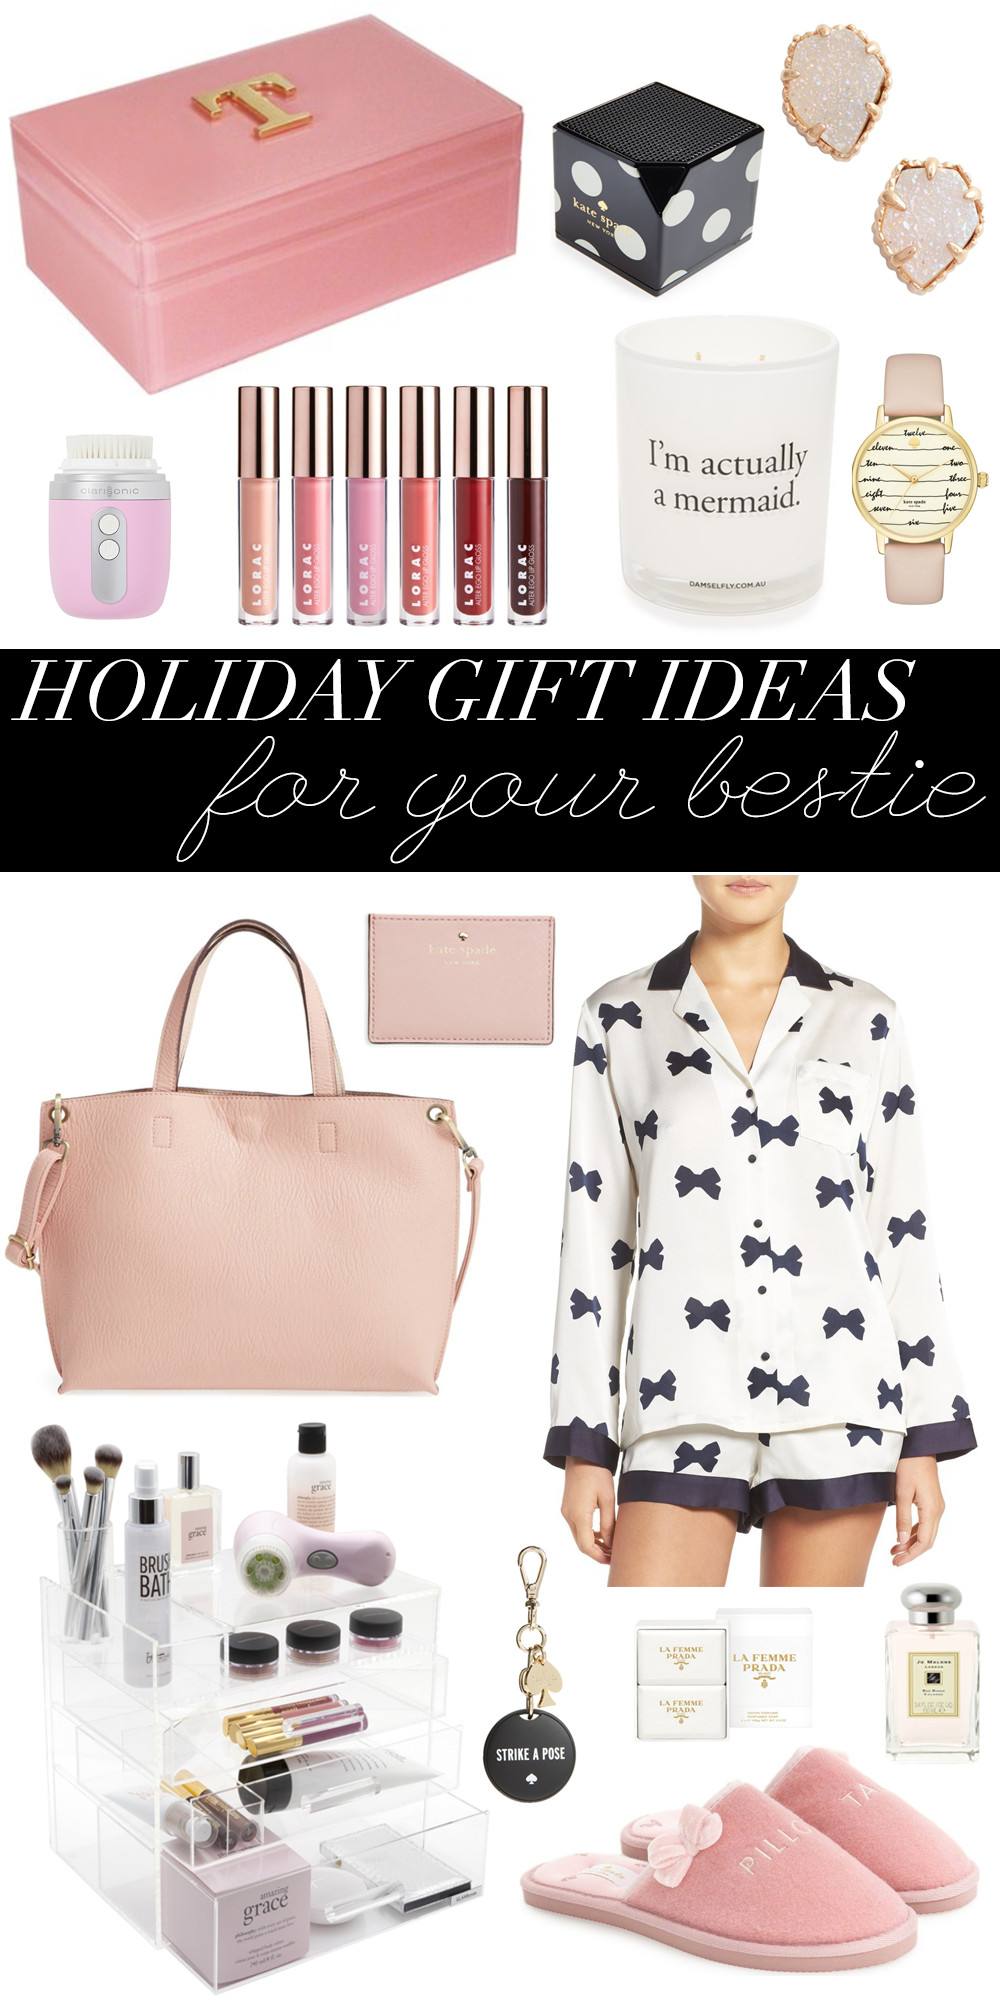 Gift Ideas For My Best Friend
 Holiday Gift Ideas For Your Best Friend Giveaway Money